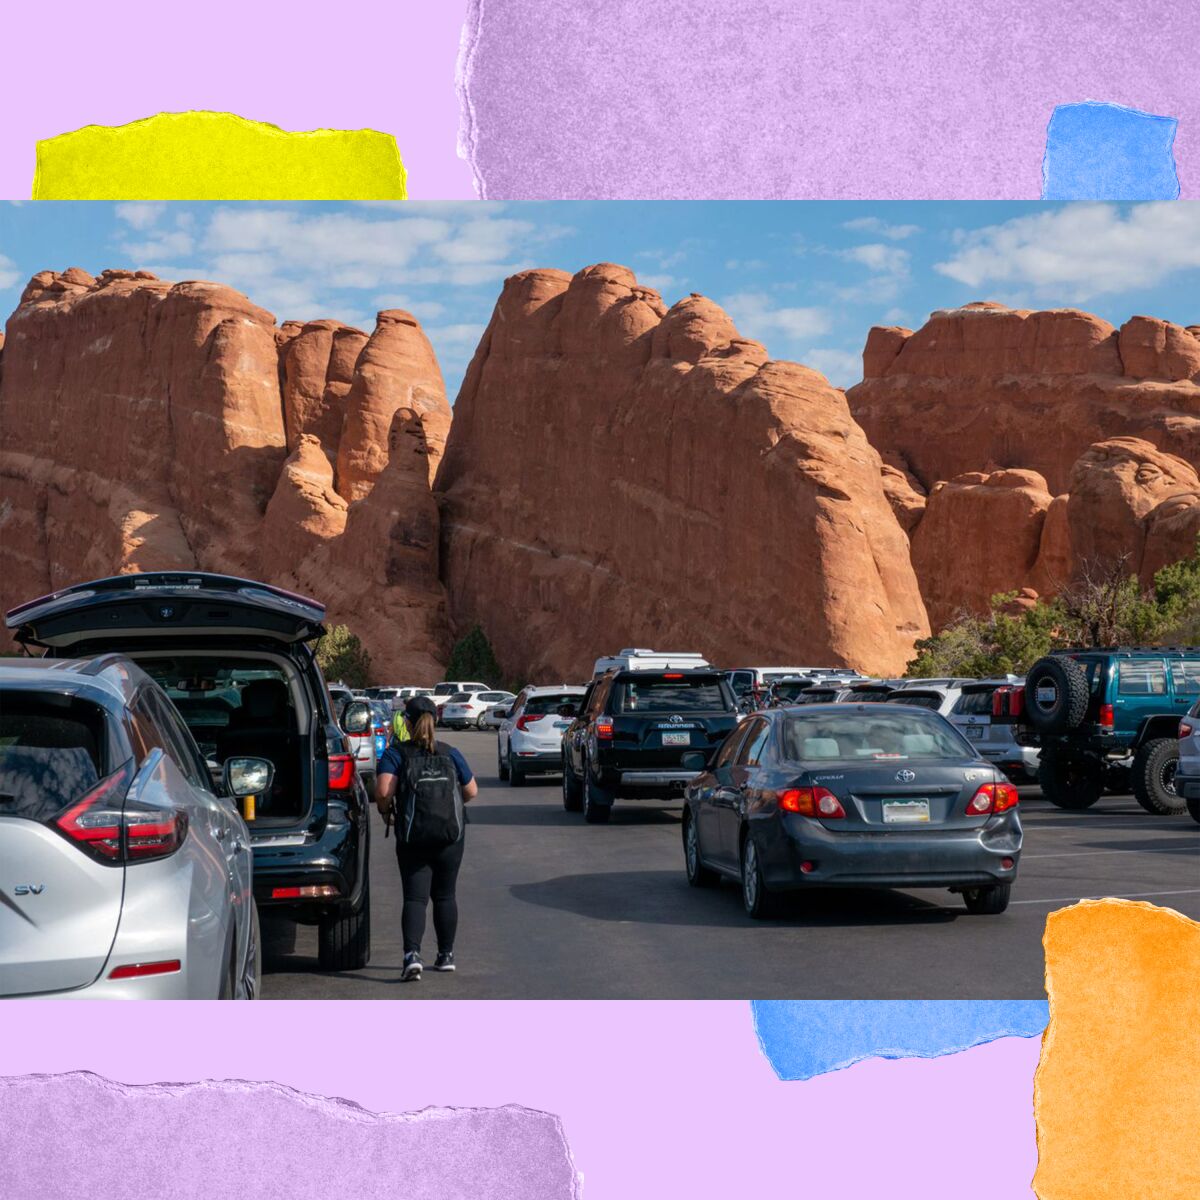 Cars are lined up in a parking area next to towering red rock boulders.